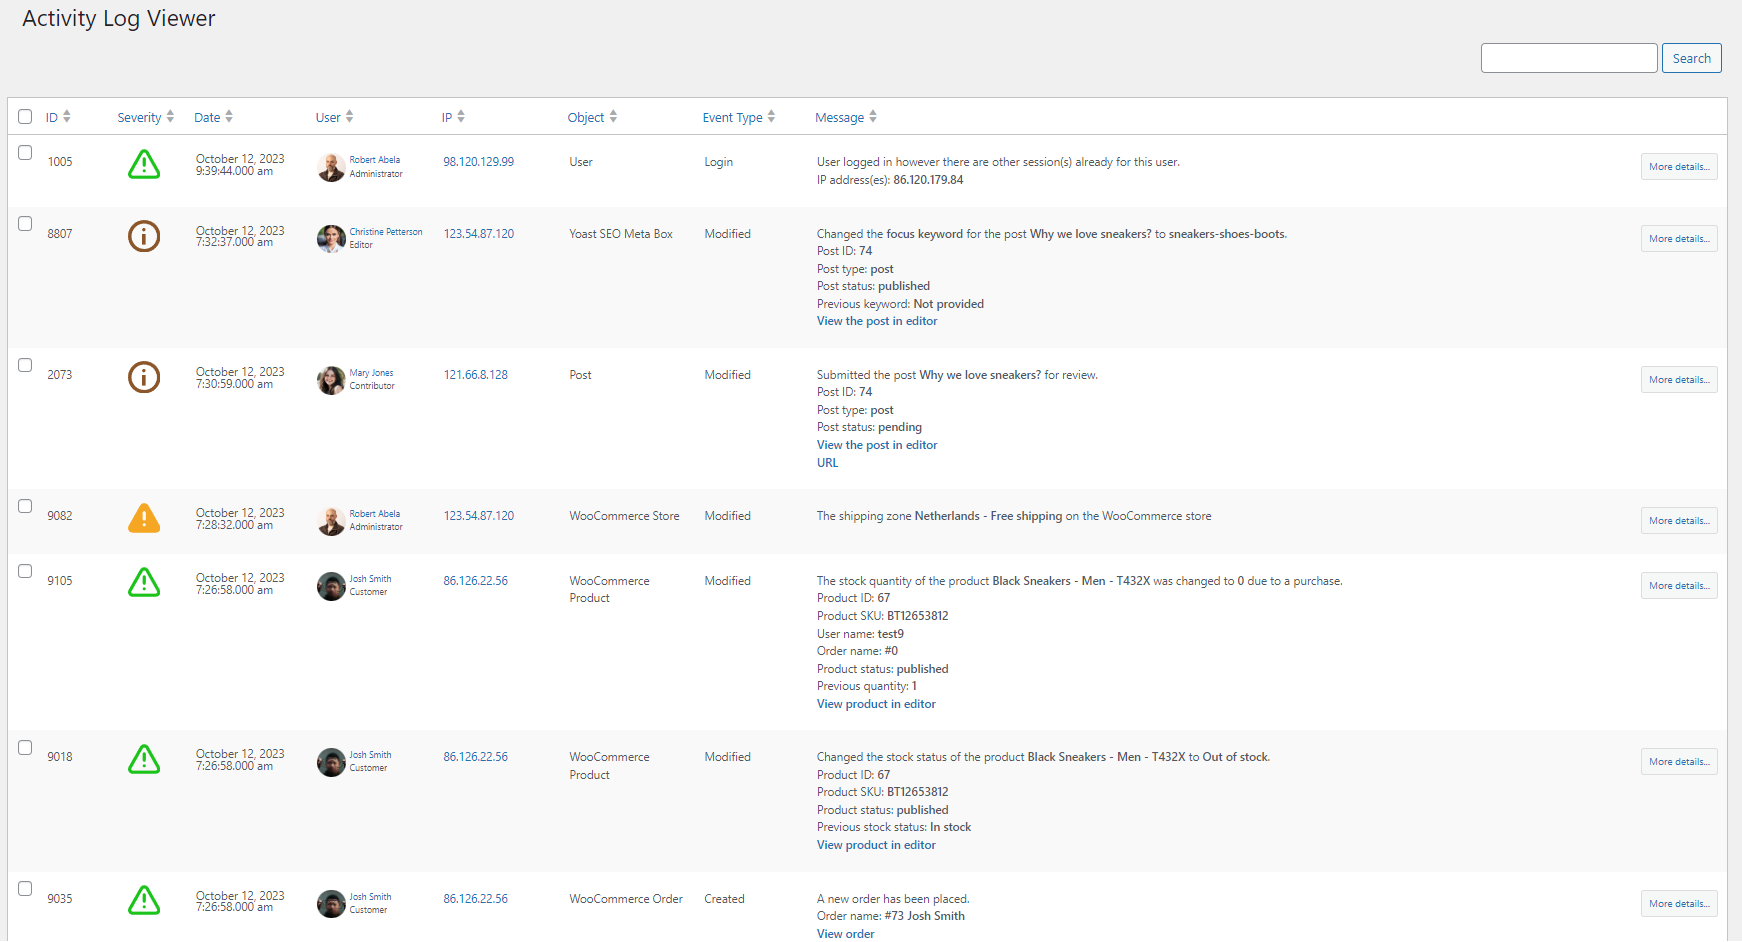 The WordPress activity logs from where the site administrator can see all the user and site changes.